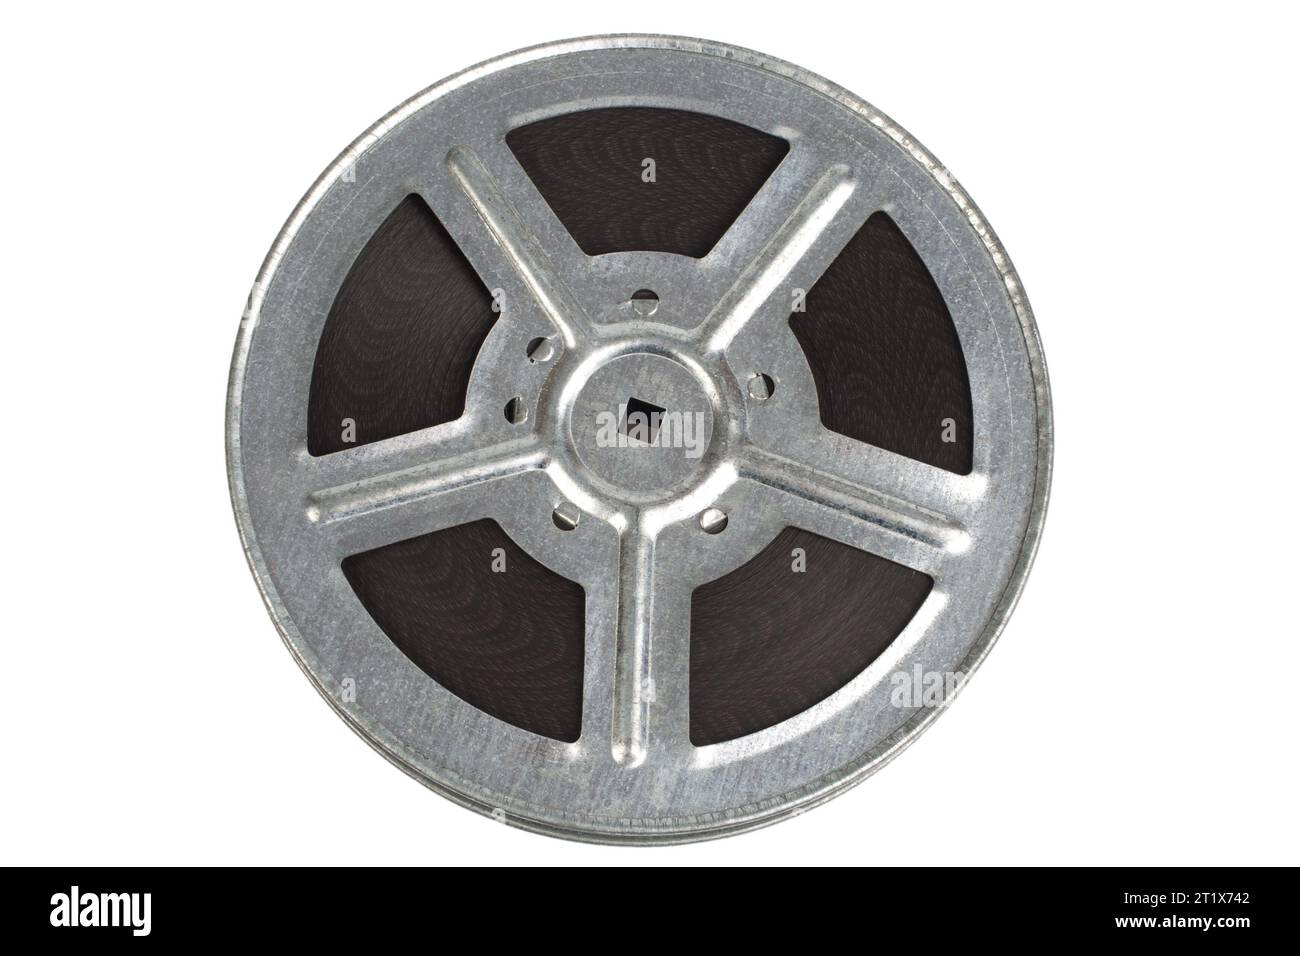 Vintage 16mm film reel and cine-film on white background isolated on white background Stock Photo